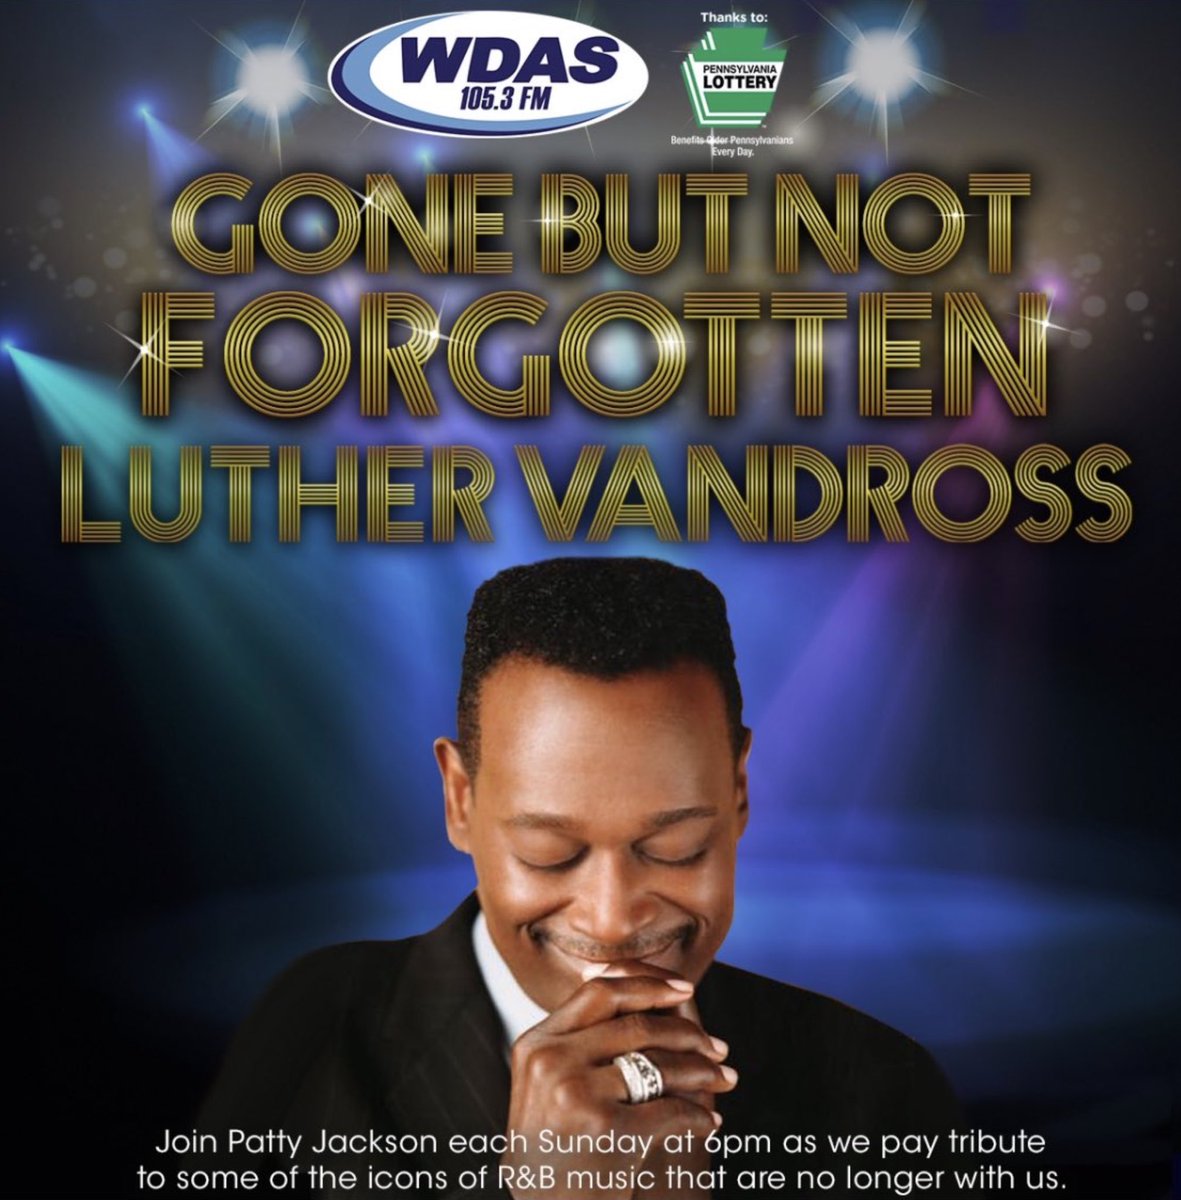 TONIGHT we pay tribute to the legendary Luther Vandross in our Gone But Not Forgotten series presented by the @PALottery ⭐️

Starting at 6pm every Sunday this Summer, join @MsPattyJackson as we celebrate these soul and R&B greats, playing their most iconic songs!